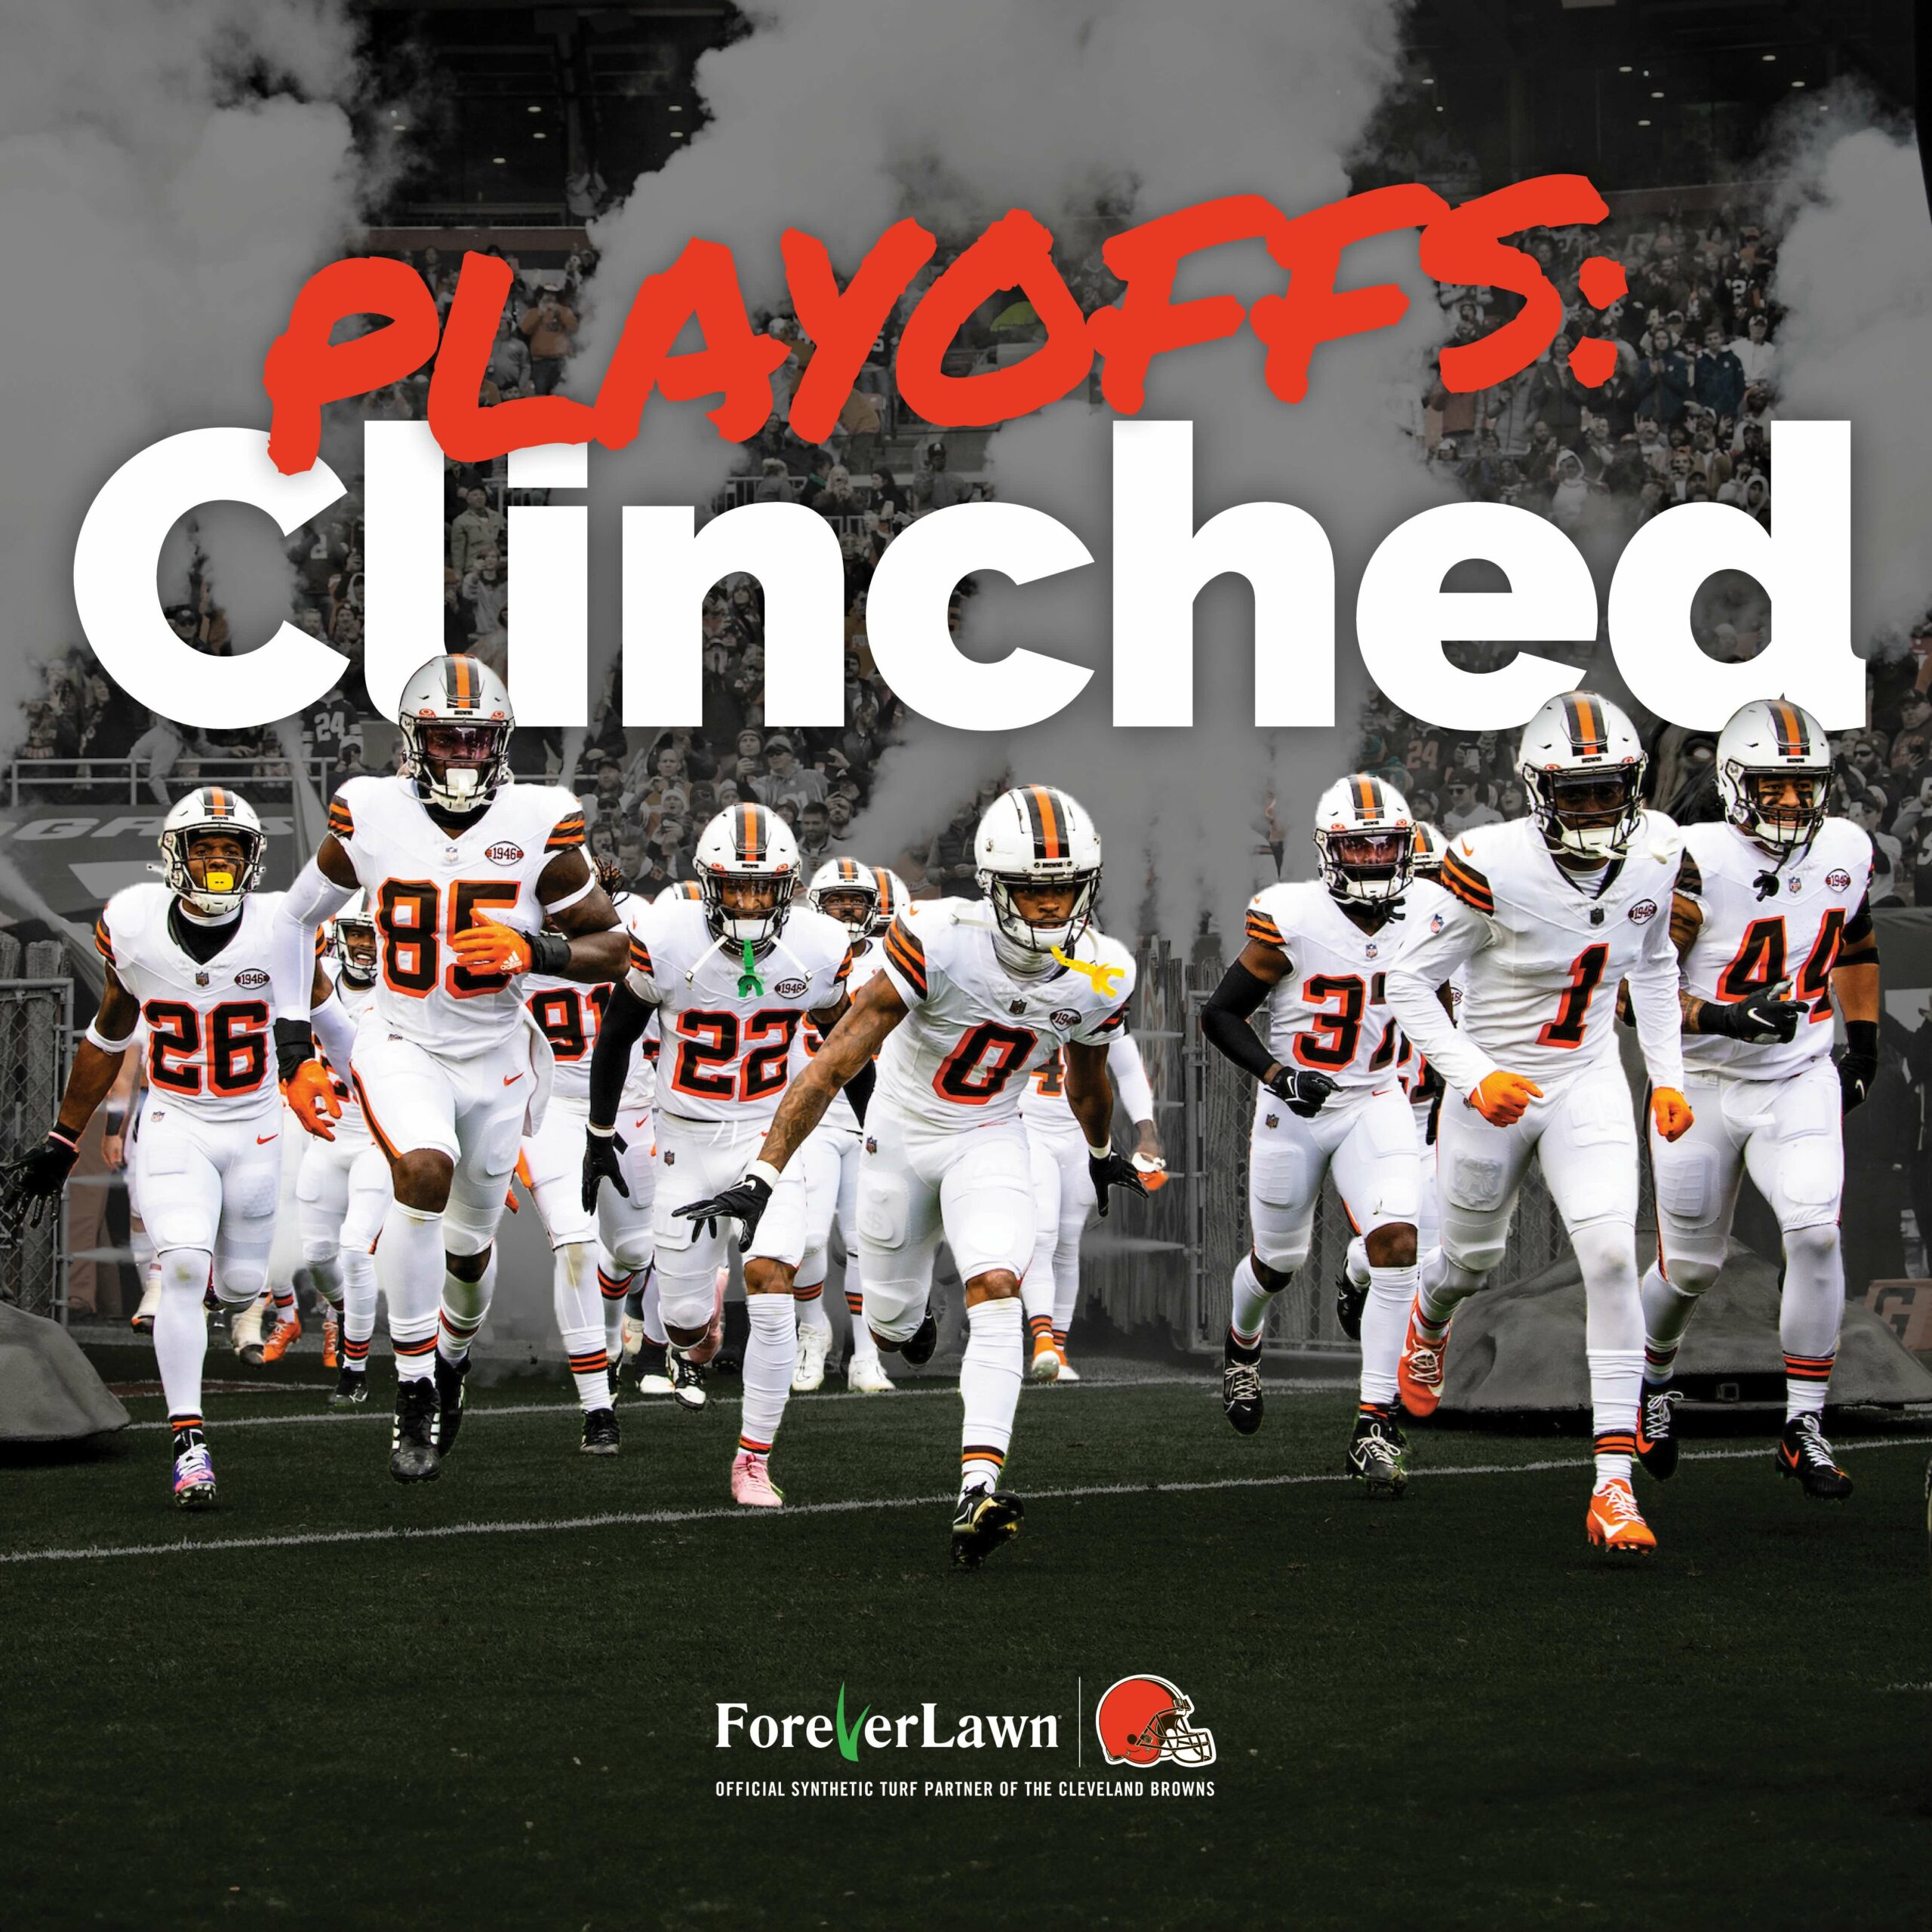 BROWNS-PLAYOFFS-CLINCHED-GRAPHIC